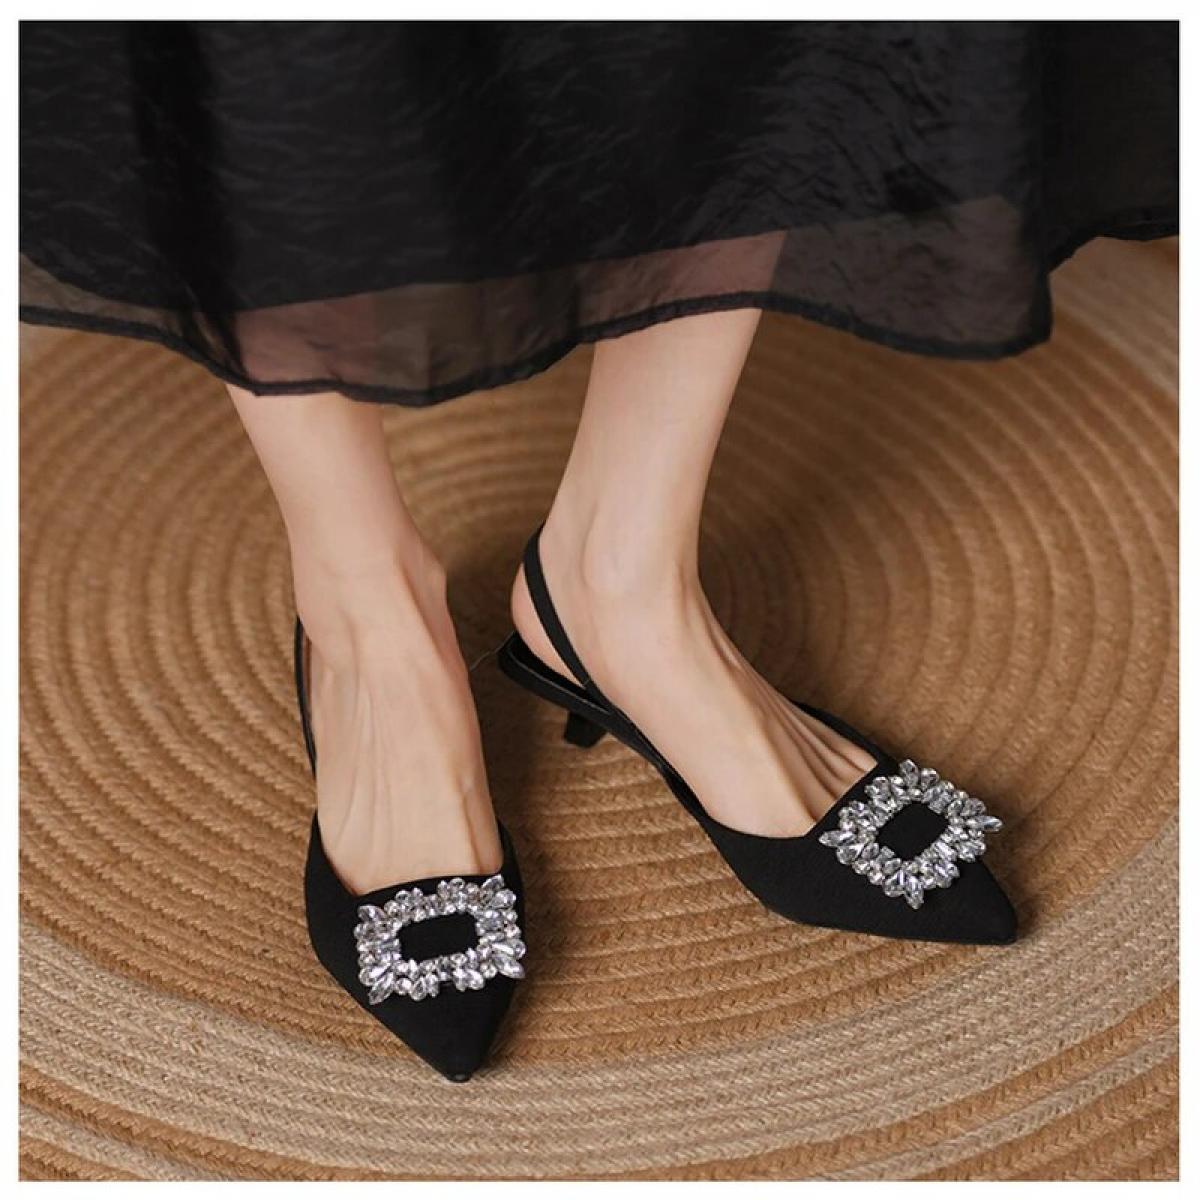 Summer New Style Fashion Women's Shoes Black Satin Crystal Strass Pointy Toe Stiletto Stripper Slingback High Heels Sand